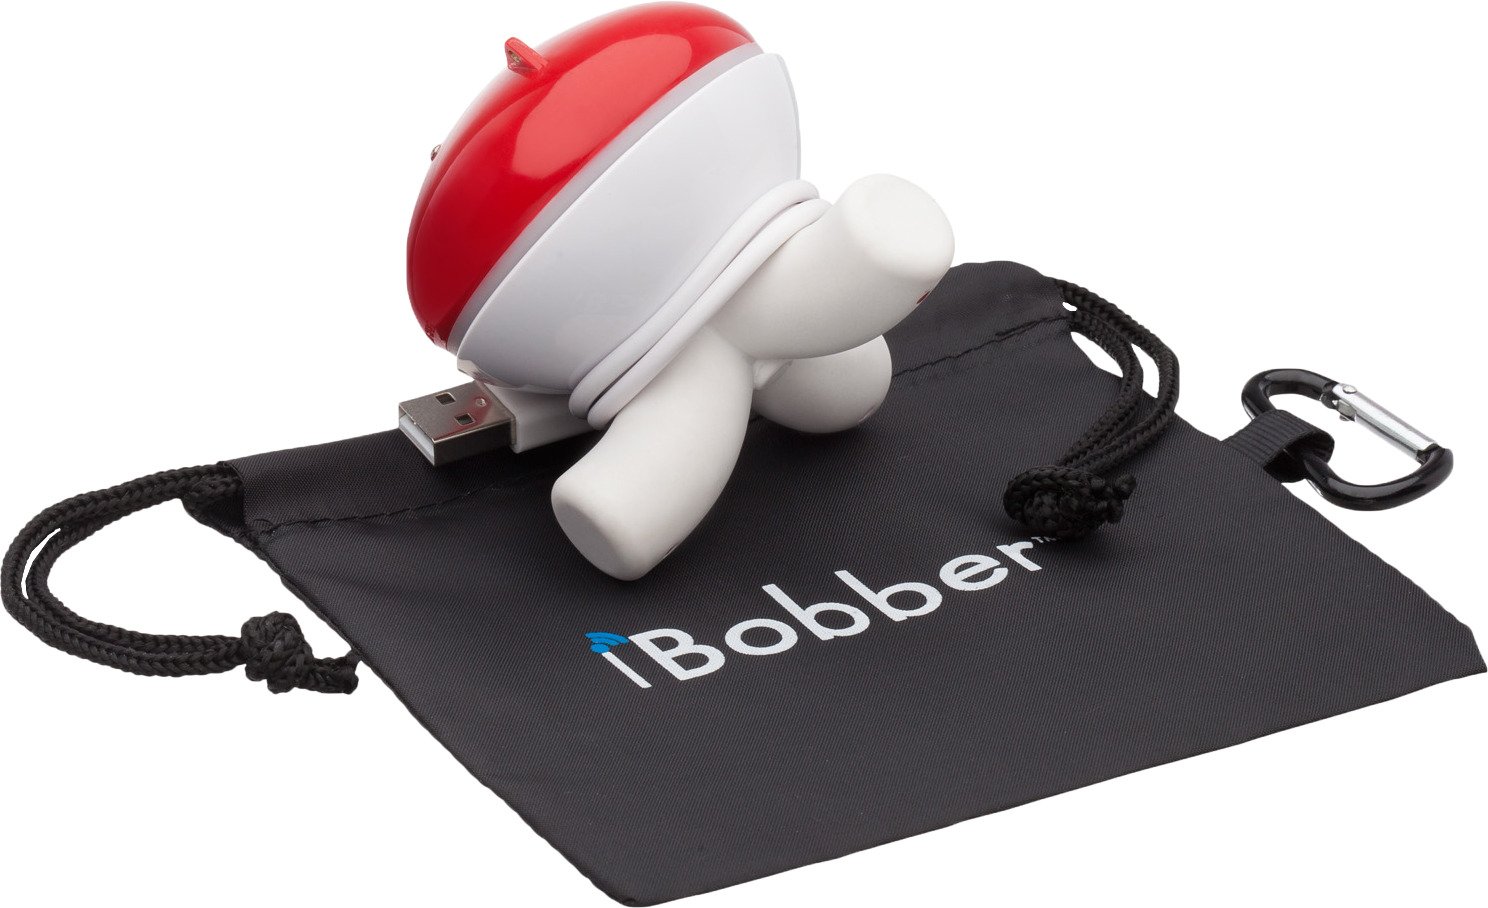 iBobber Castable Fishfinder from ReelSonar - Great help for any